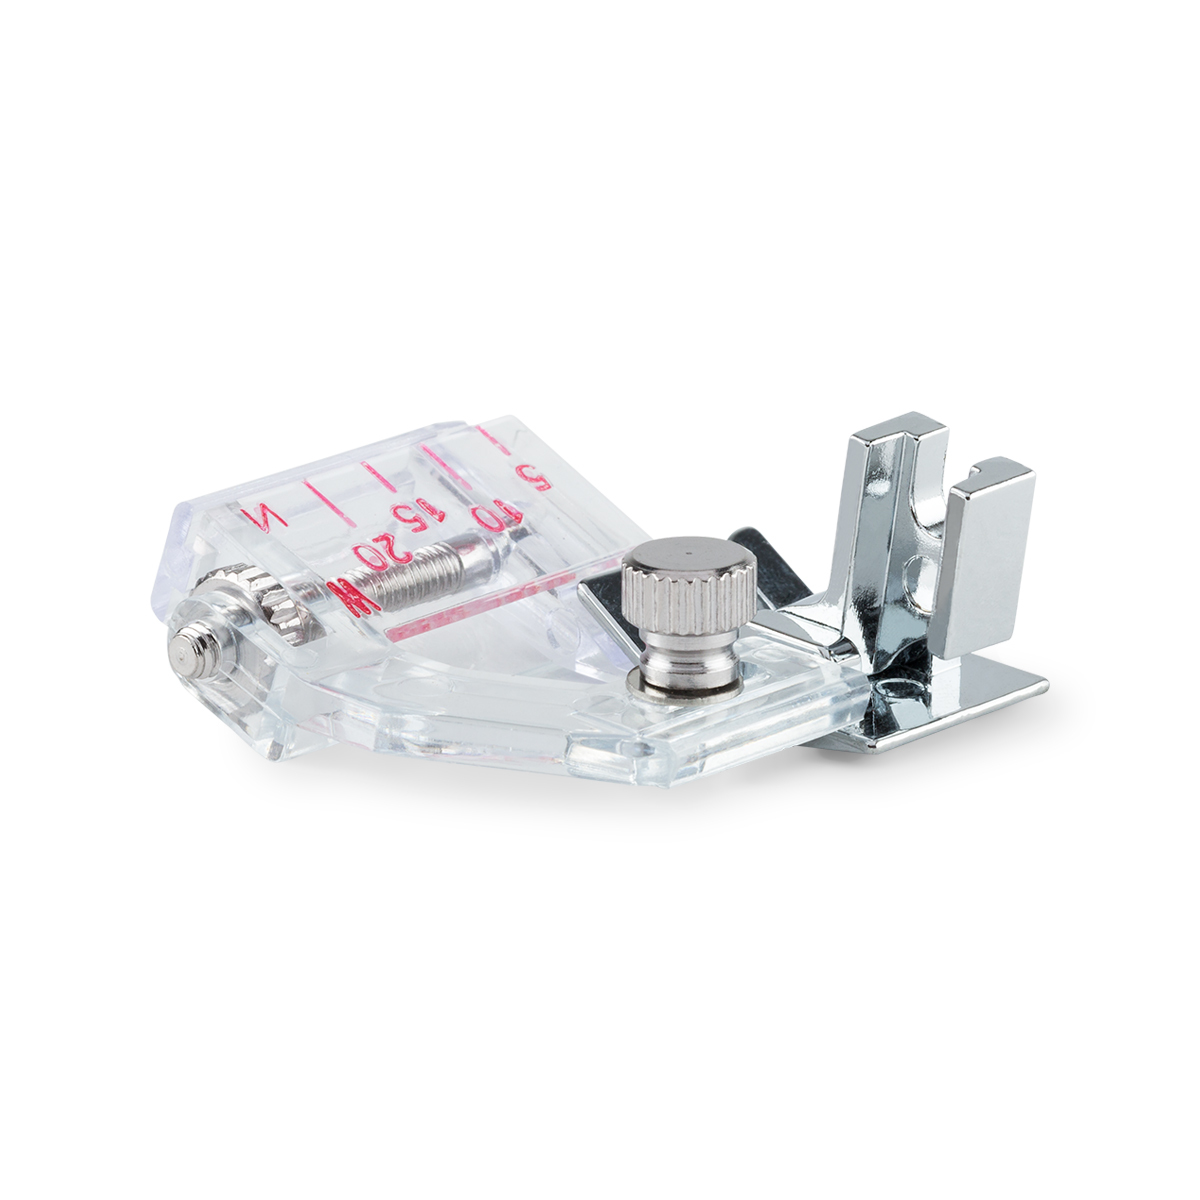 Bias Binder Foot  Sewing Accessory - The Sewing Loft